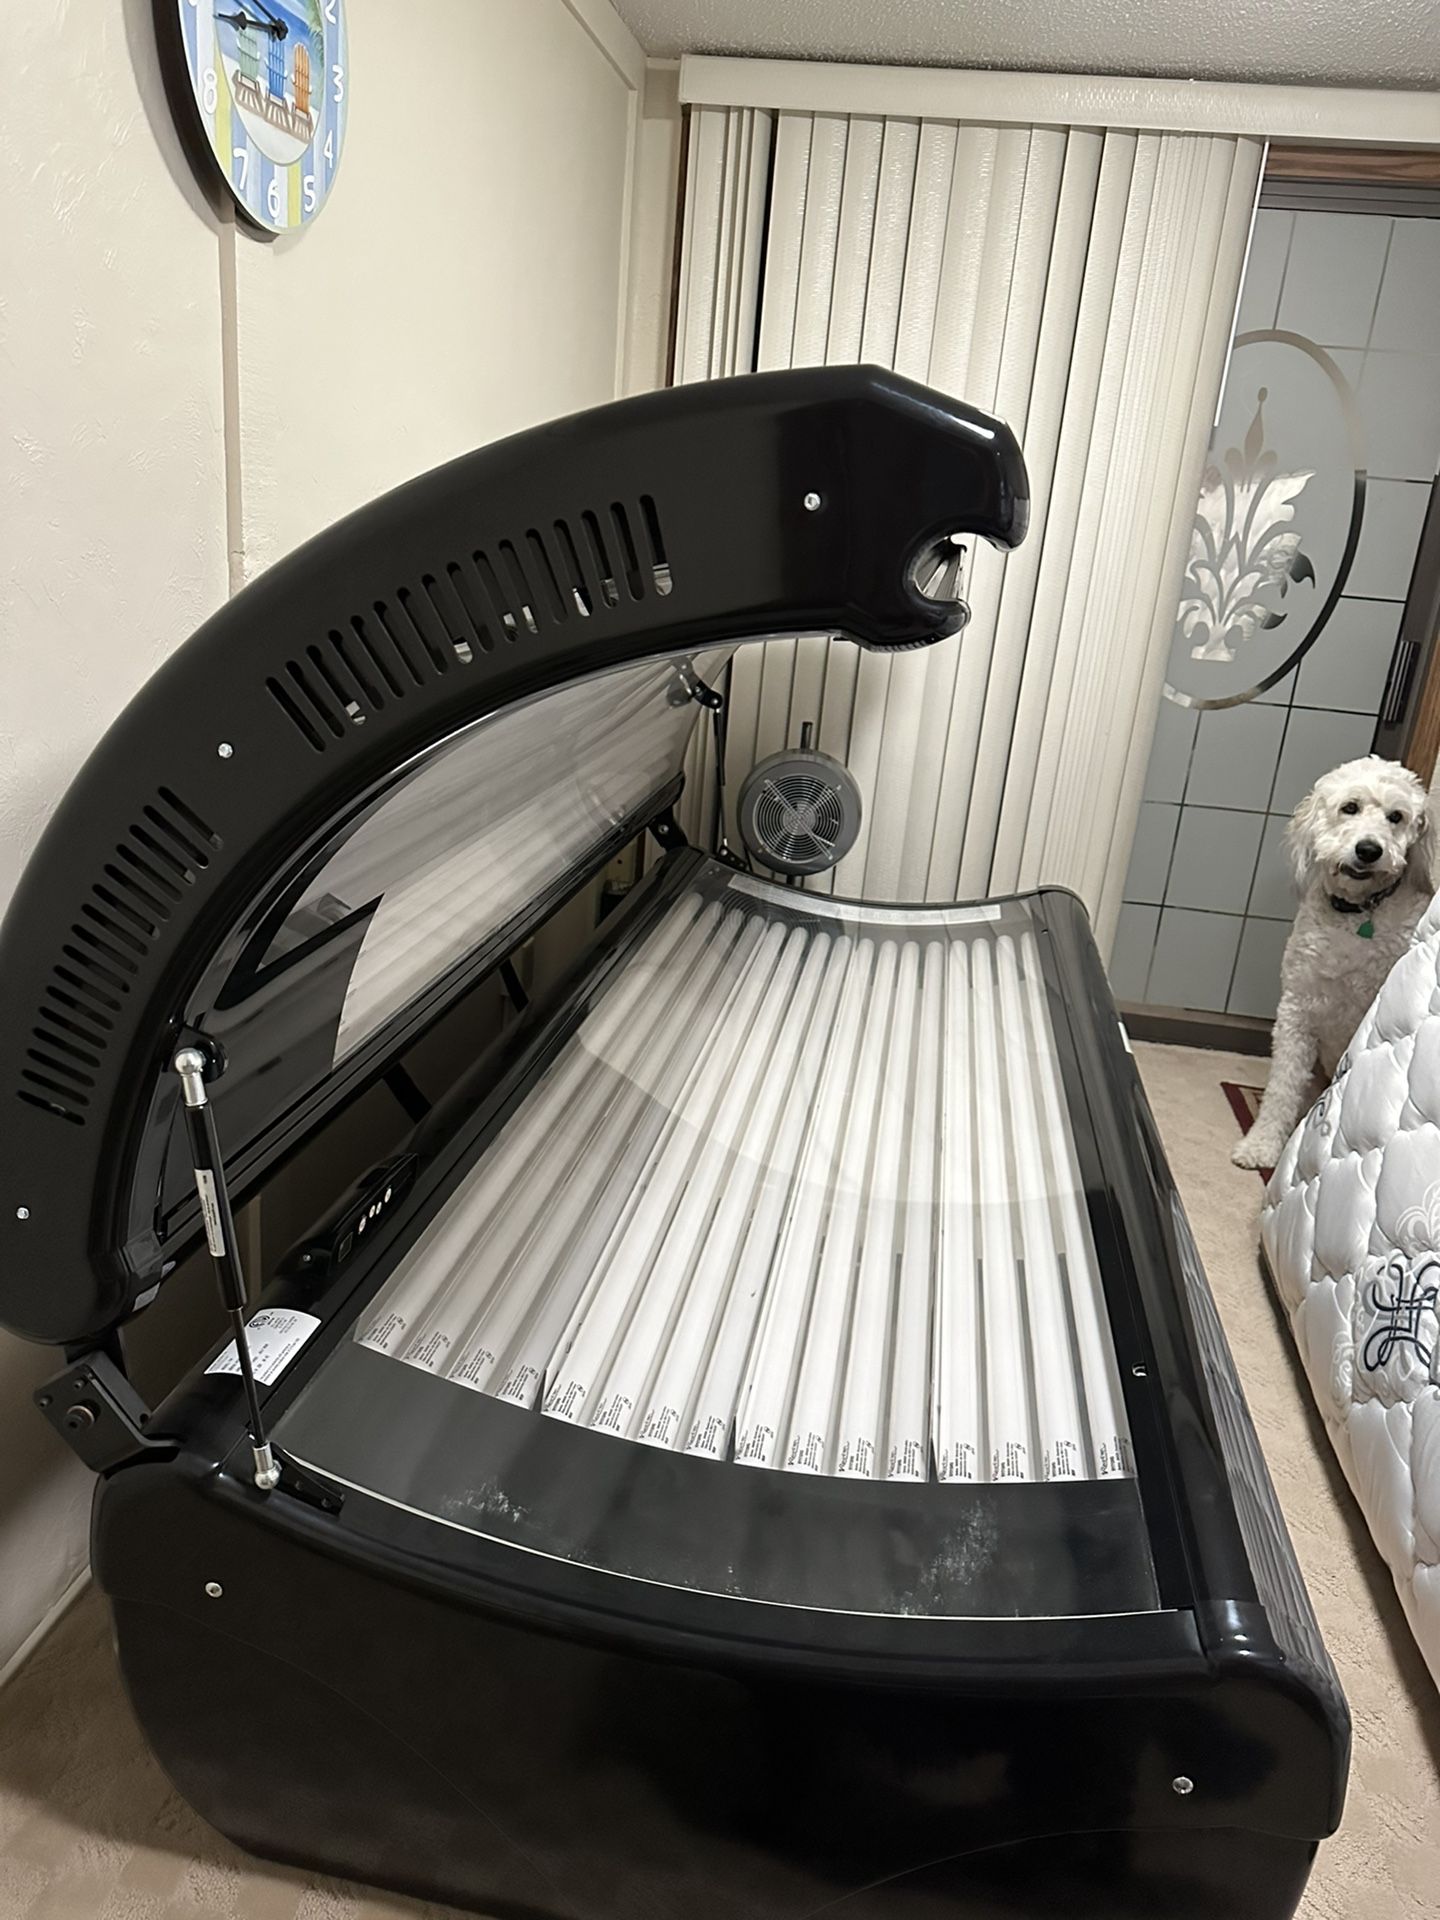 Tanning Bed Ovation 3400 Model 134 Used